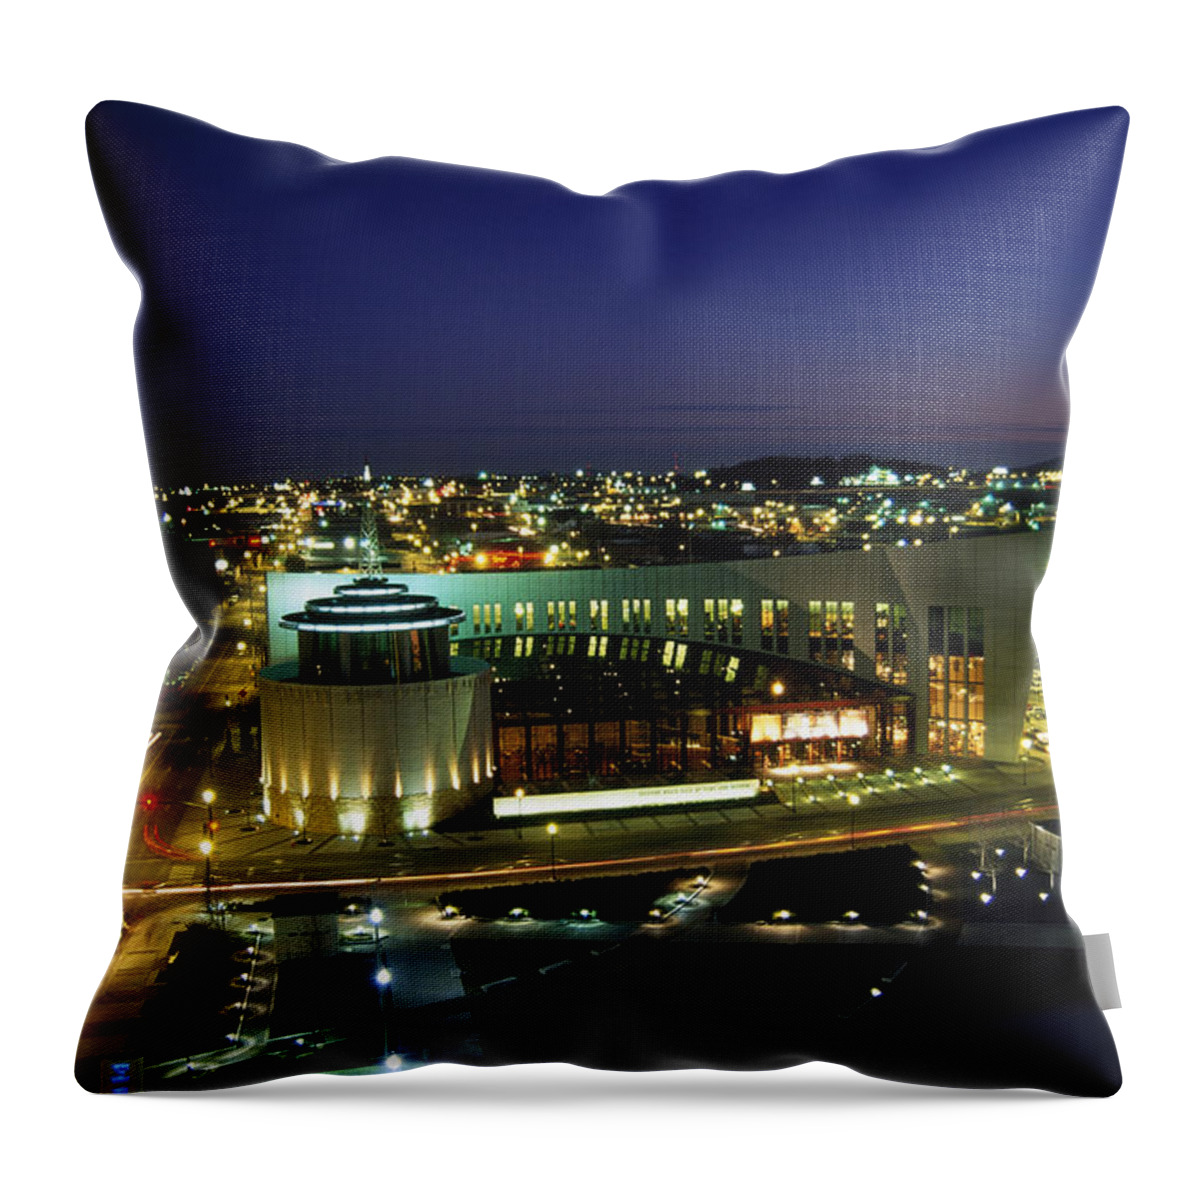 Music Throw Pillow featuring the photograph Country Music Hall Of Fame Museum by Barry Winiker